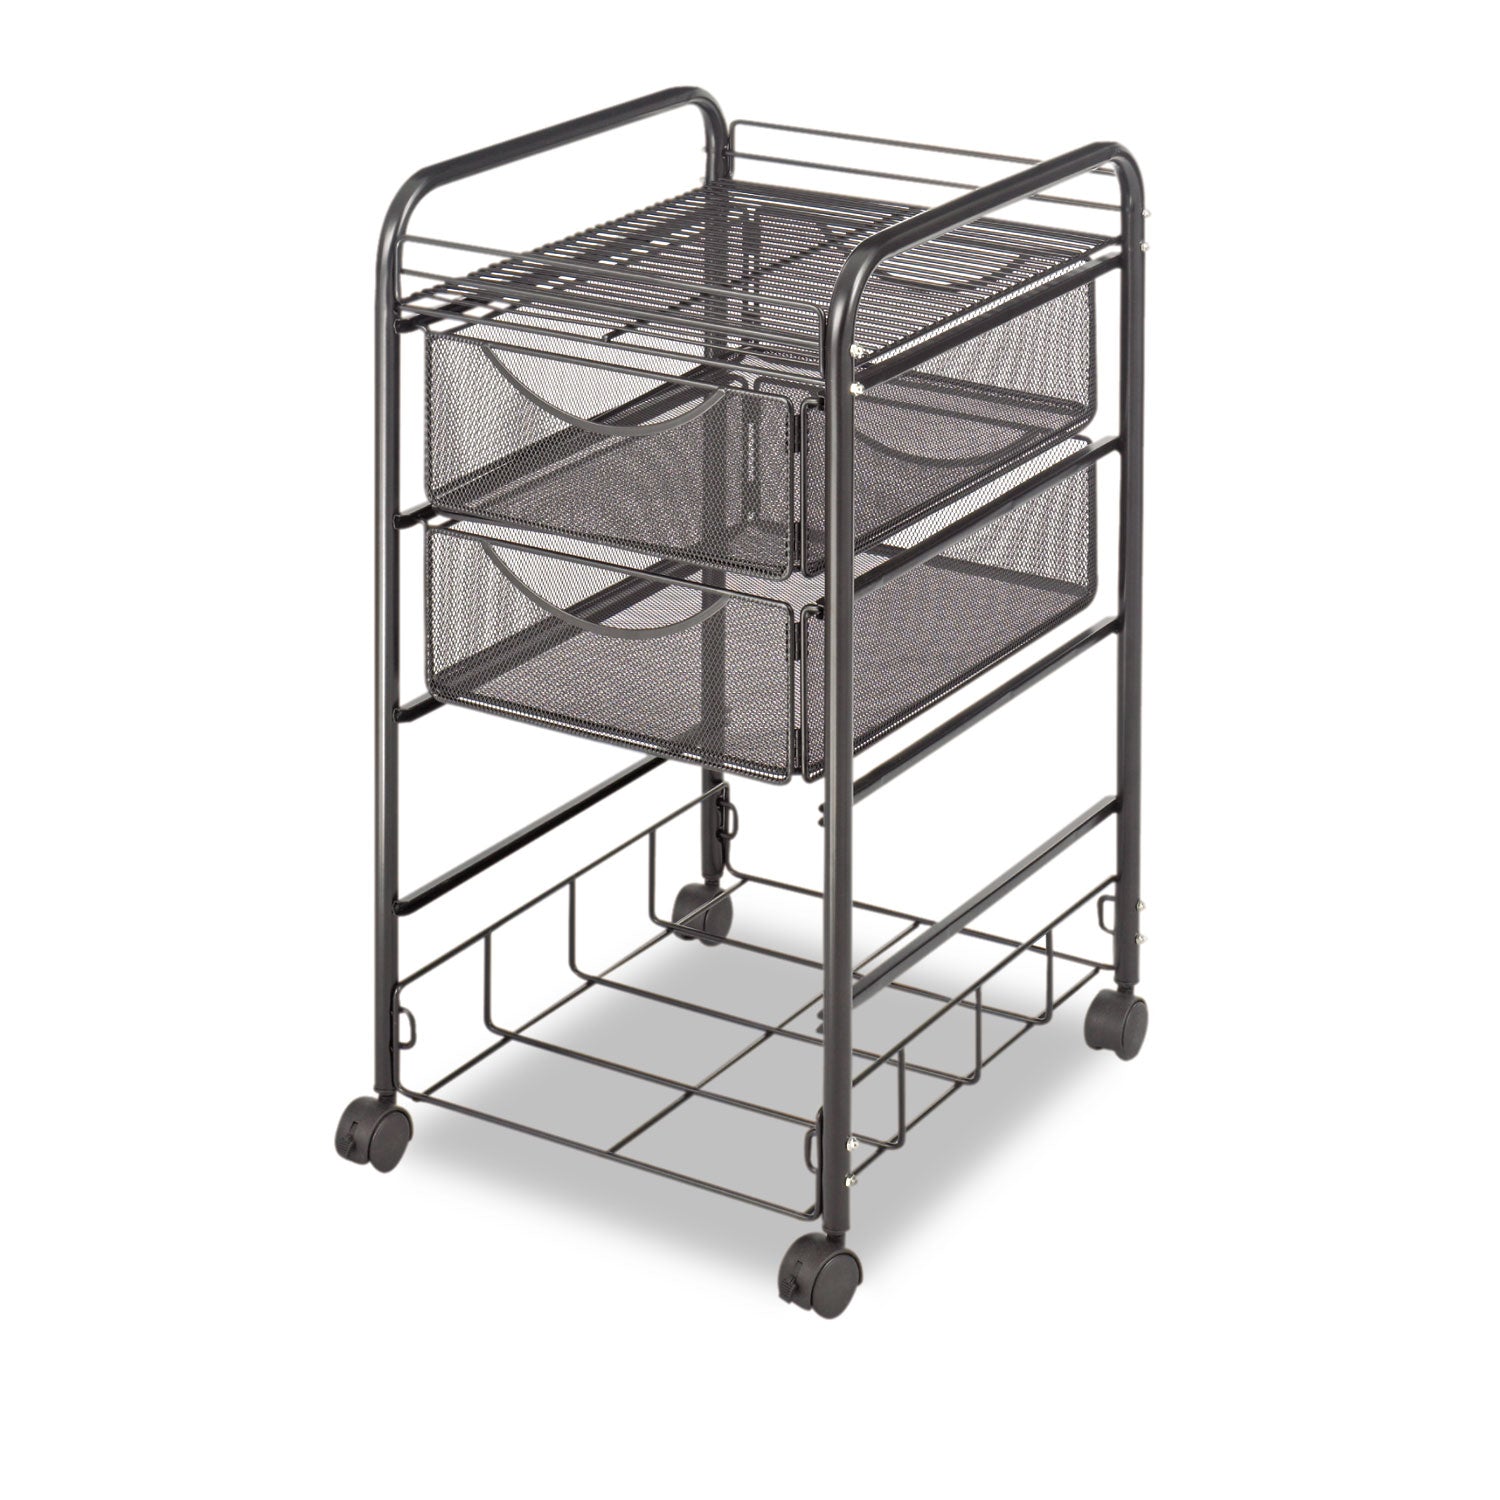 Safco Onyx Double Mesh Mobile File Cart - 2 Shelf - 4 Drawer - 4 Casters - 1.50" Caster Size - x 15.8" Width x 17" Depth x 27" Height - Black Steel Frame - Black - 1 Each - 2